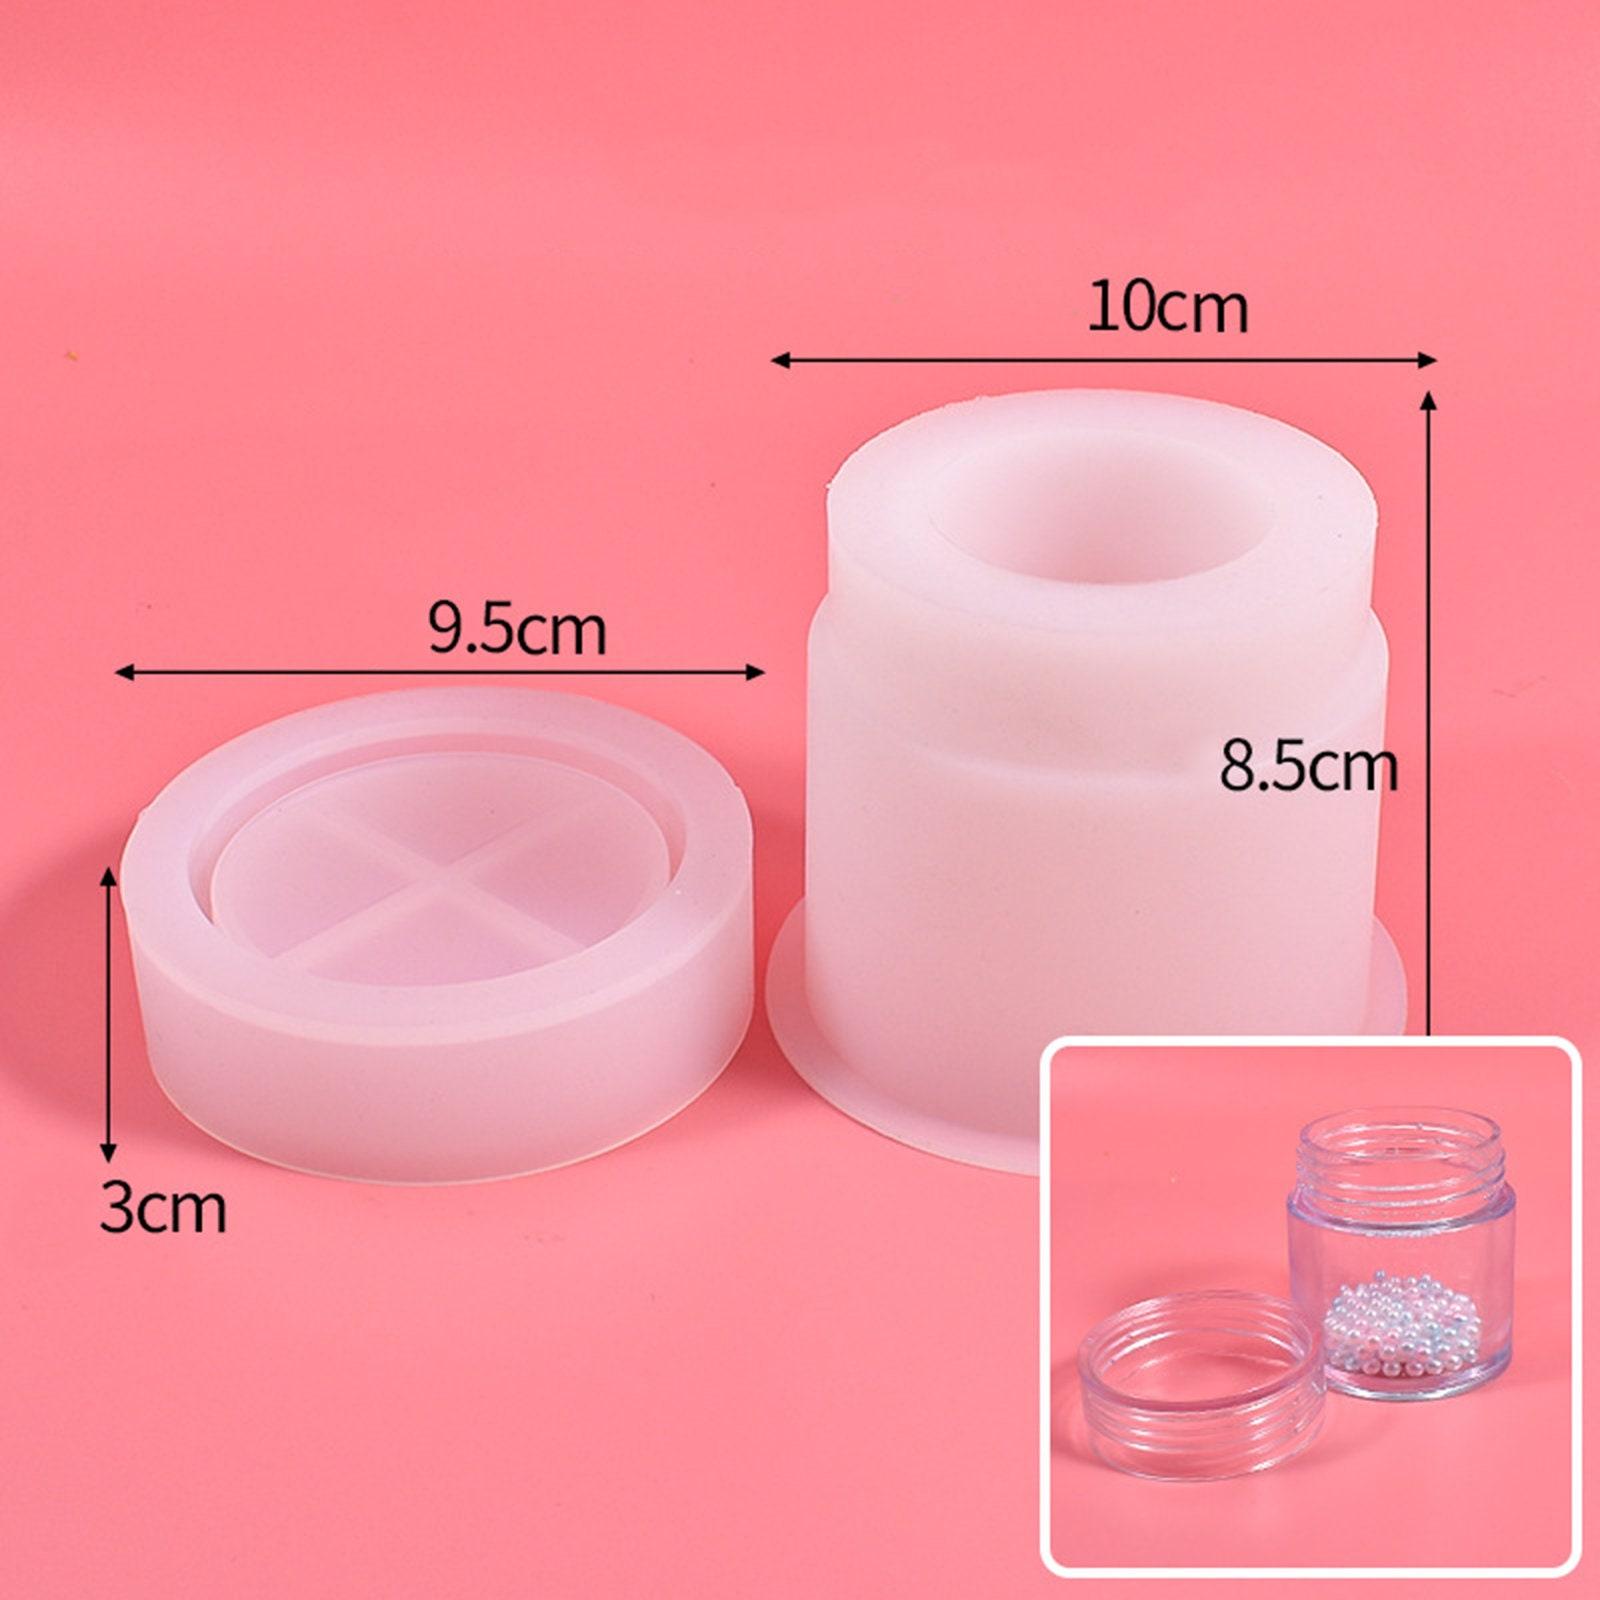 Mold - Jar Casting Mold - for Epoxy, Clay or other casting medium - Jar with screw top lid